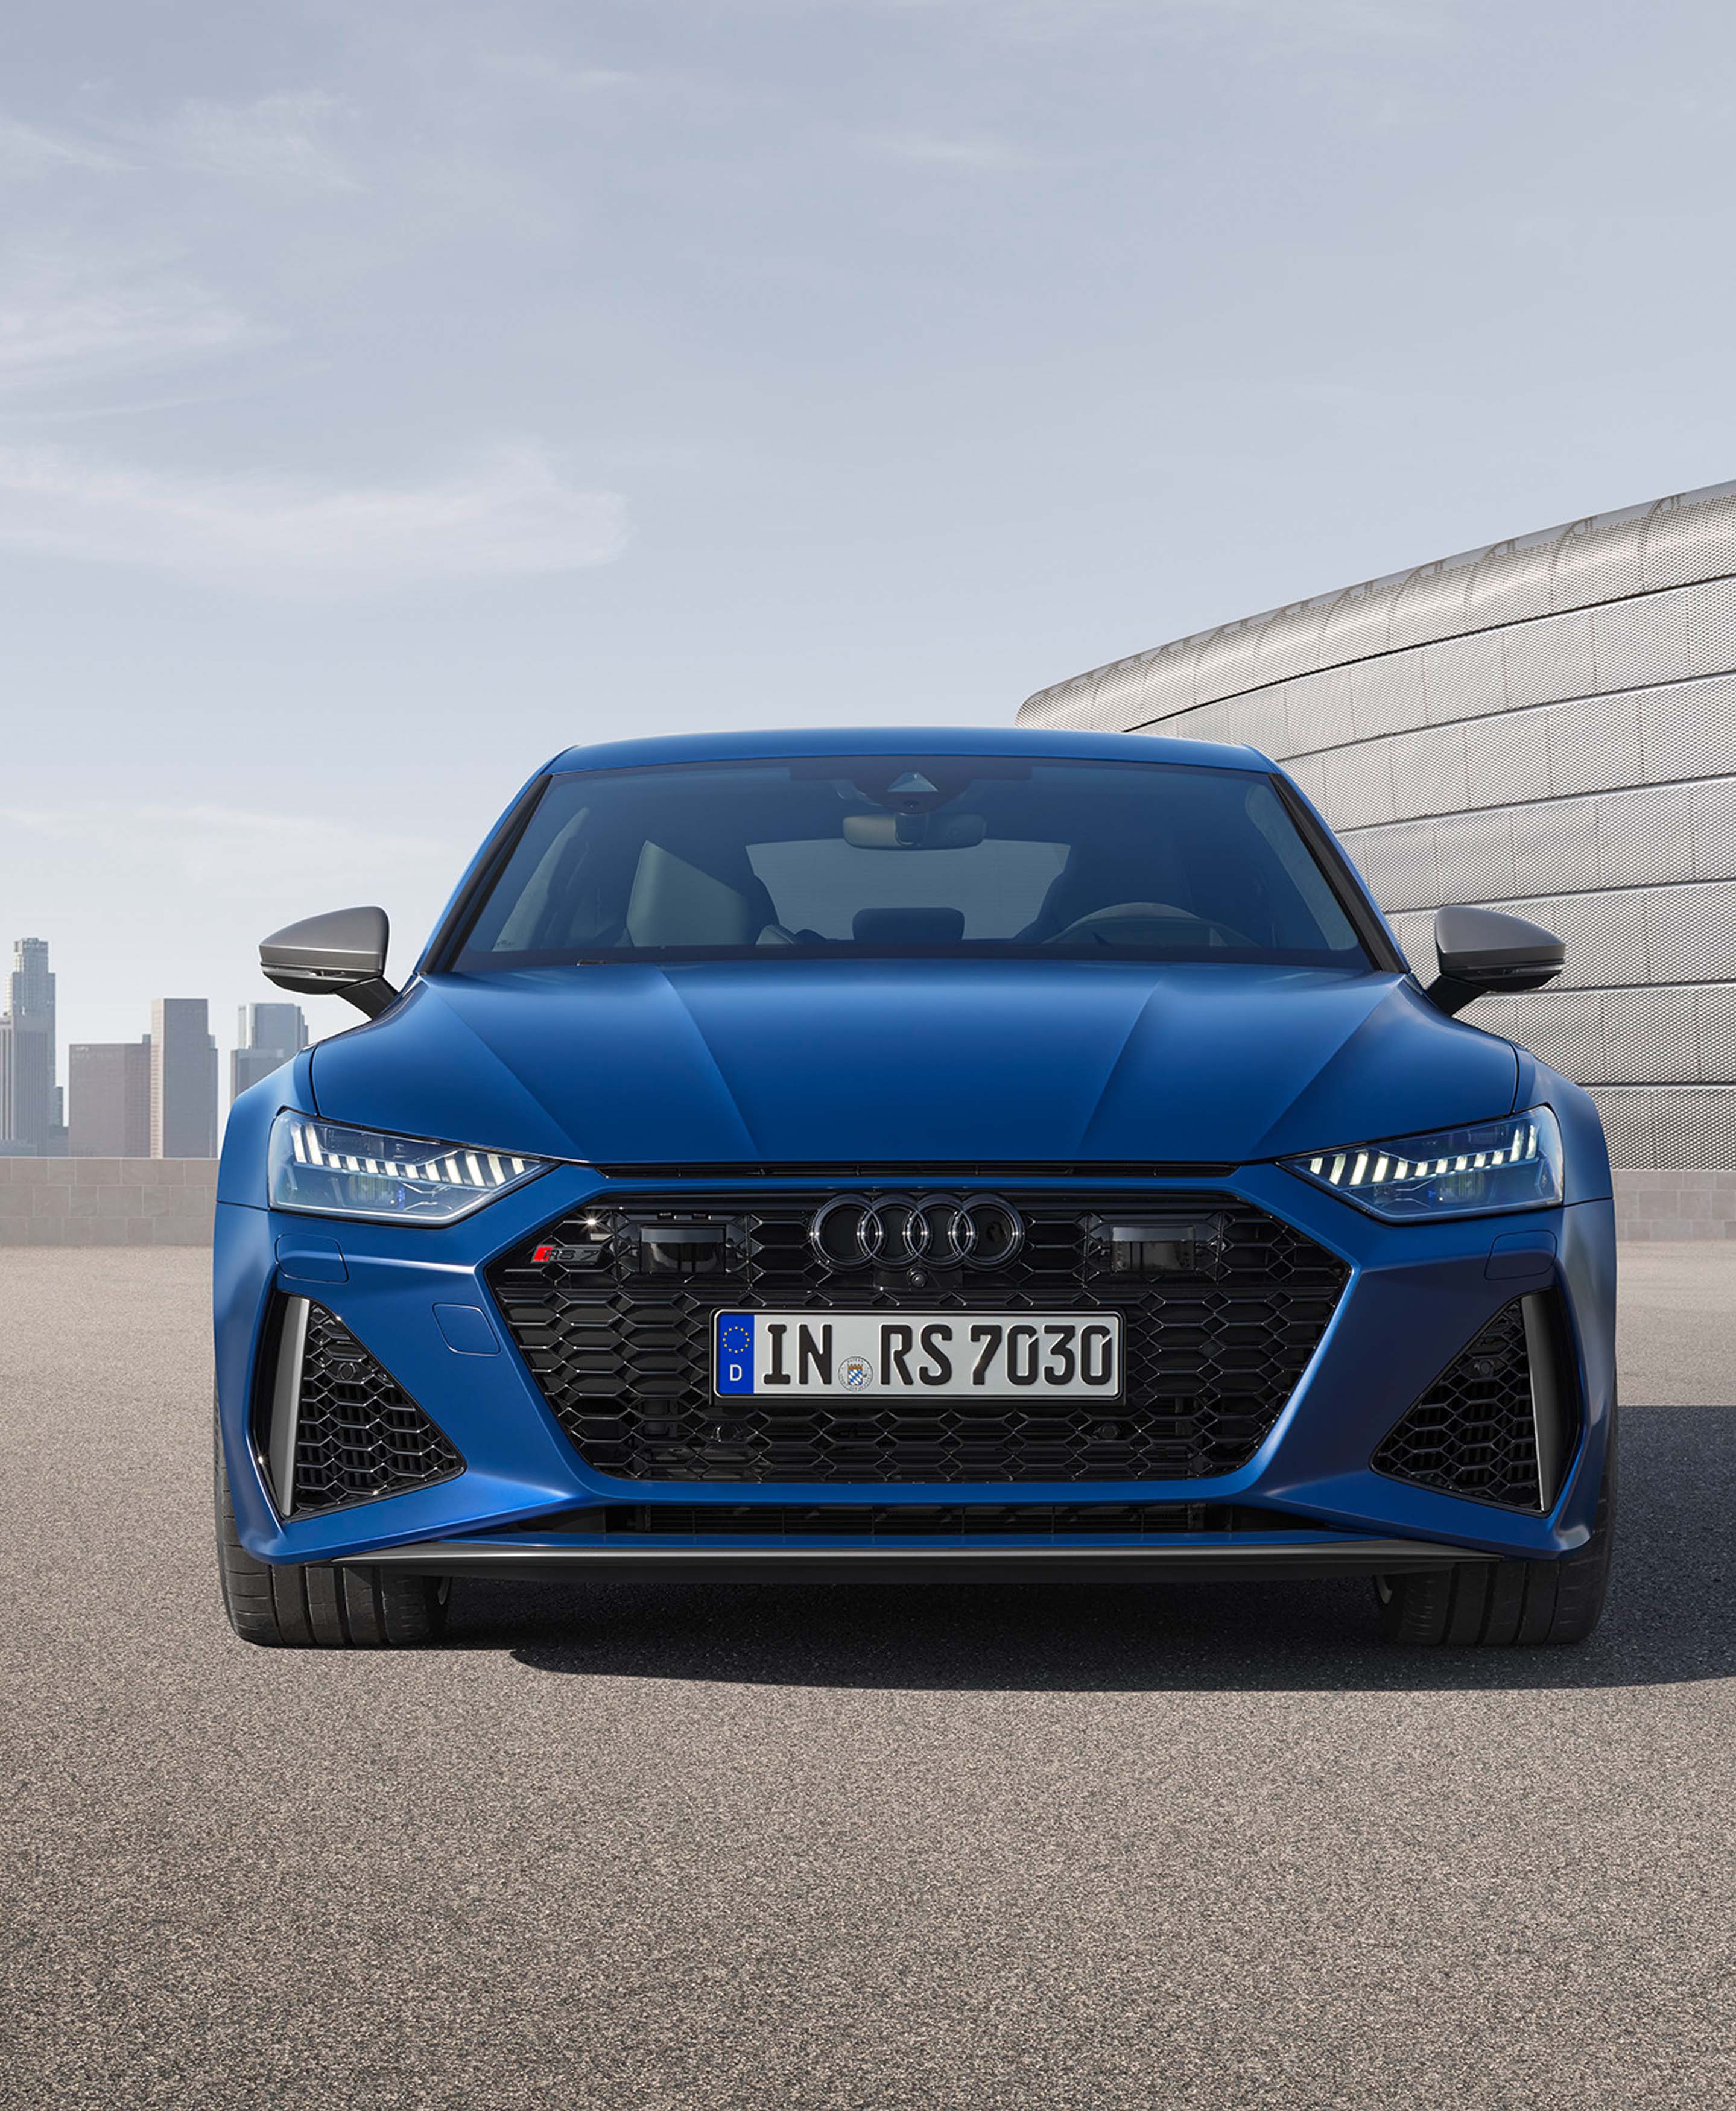 More Sportiness, More Power, More Driving Pleasure: the new Audi